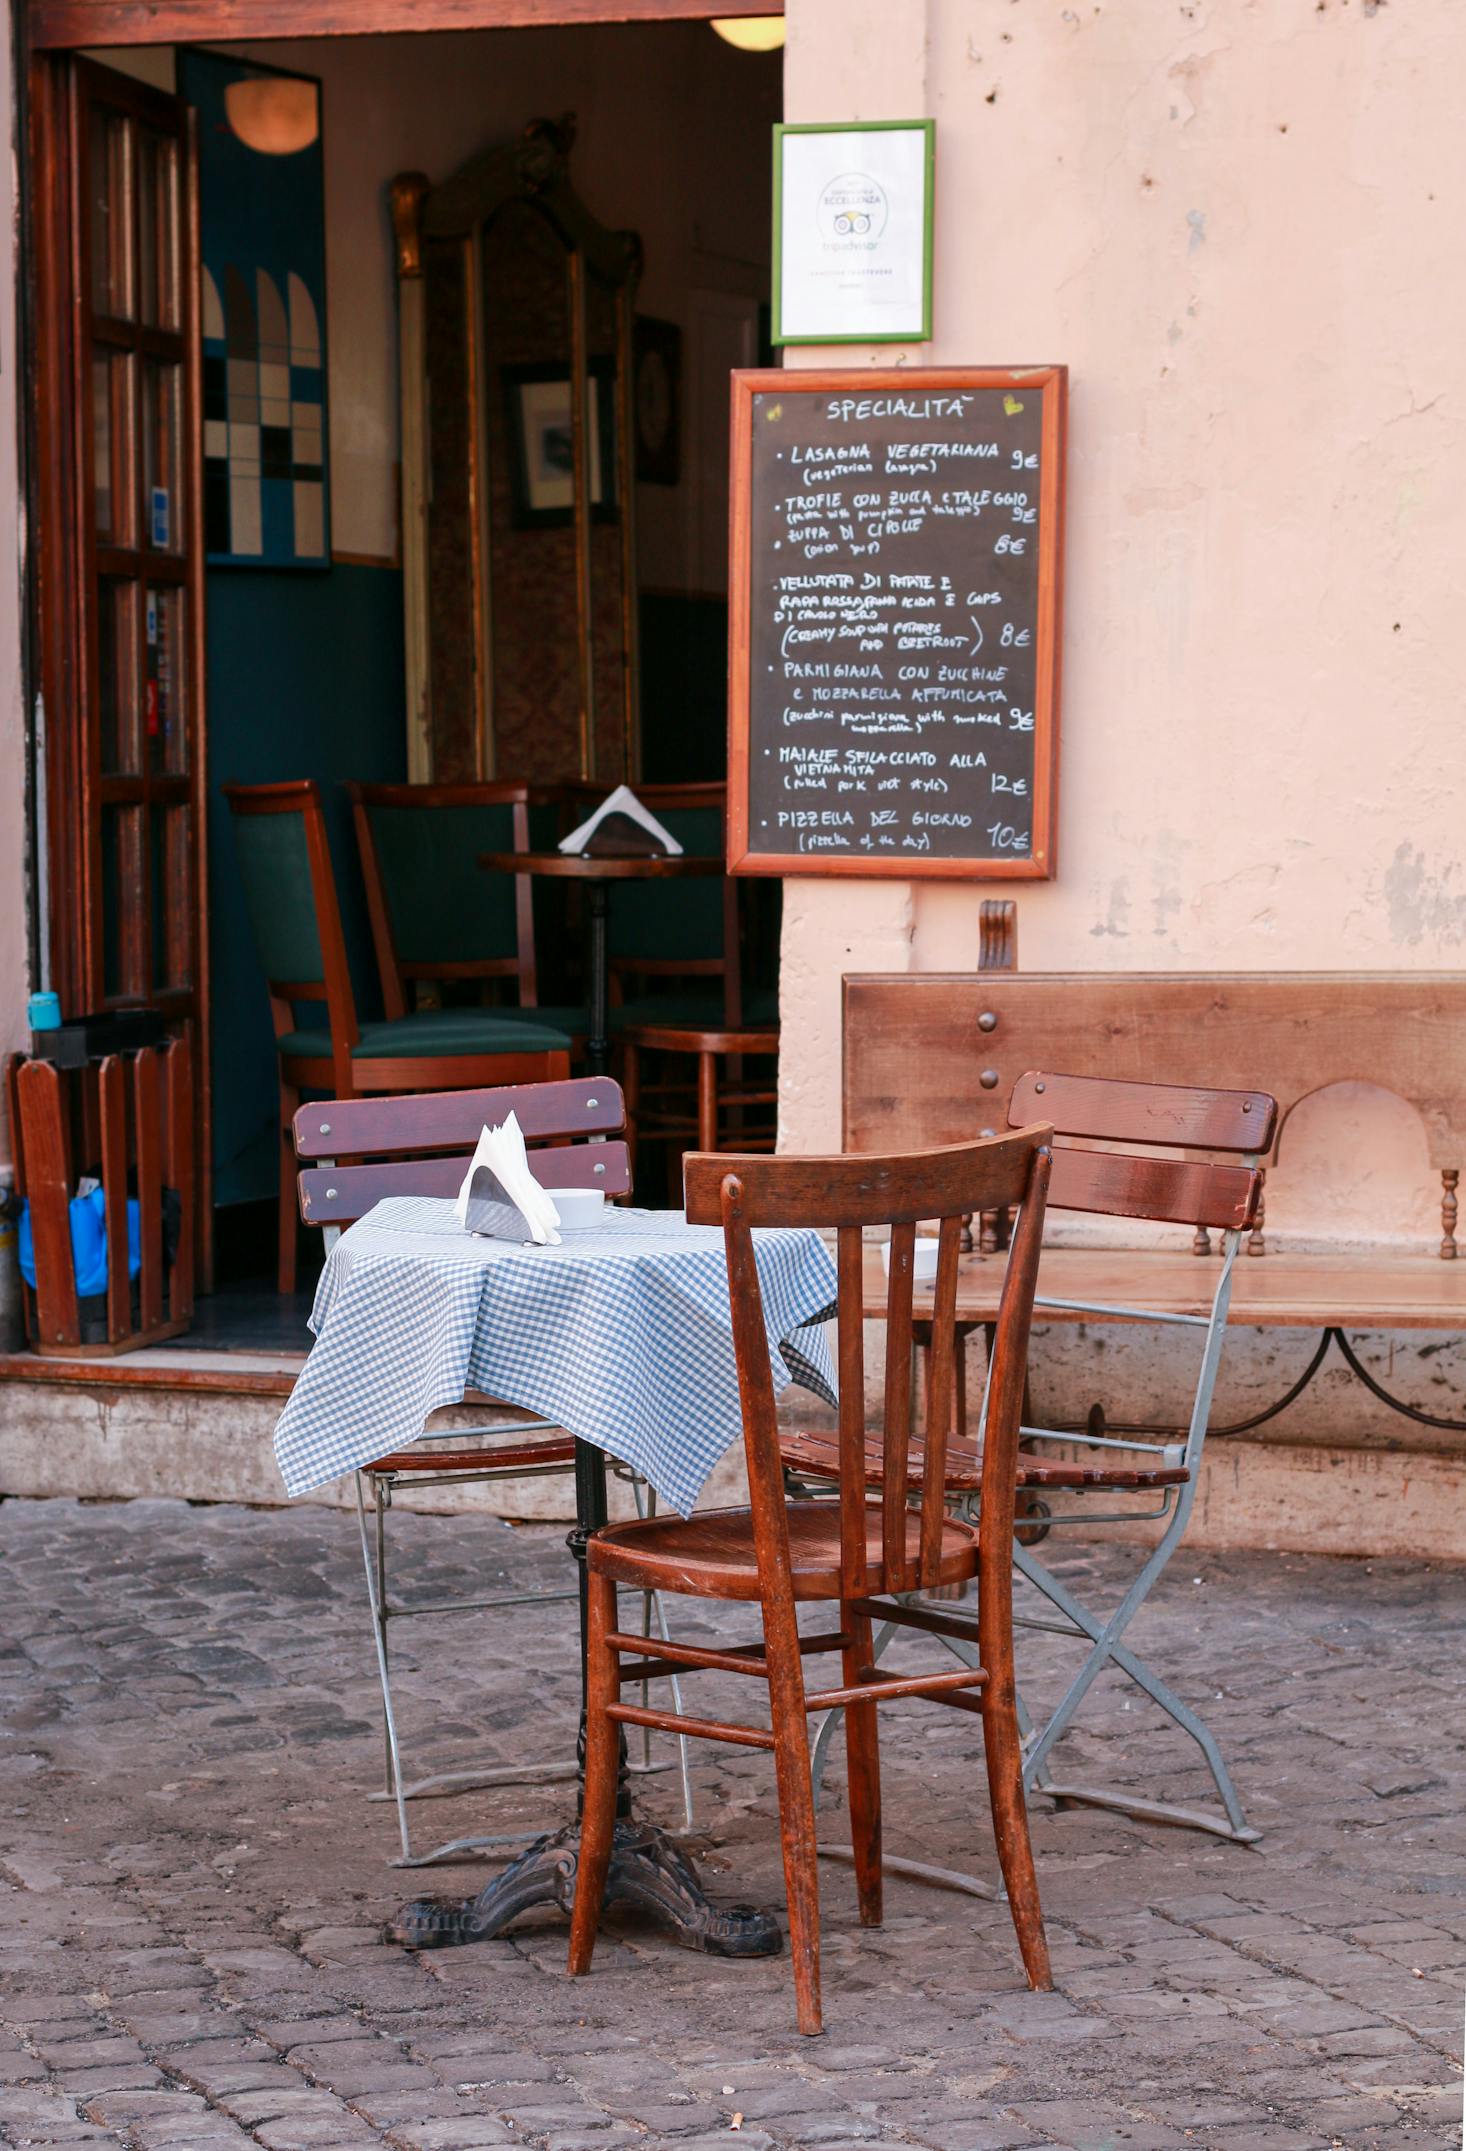 Coffee shops for freelance workers in Rome